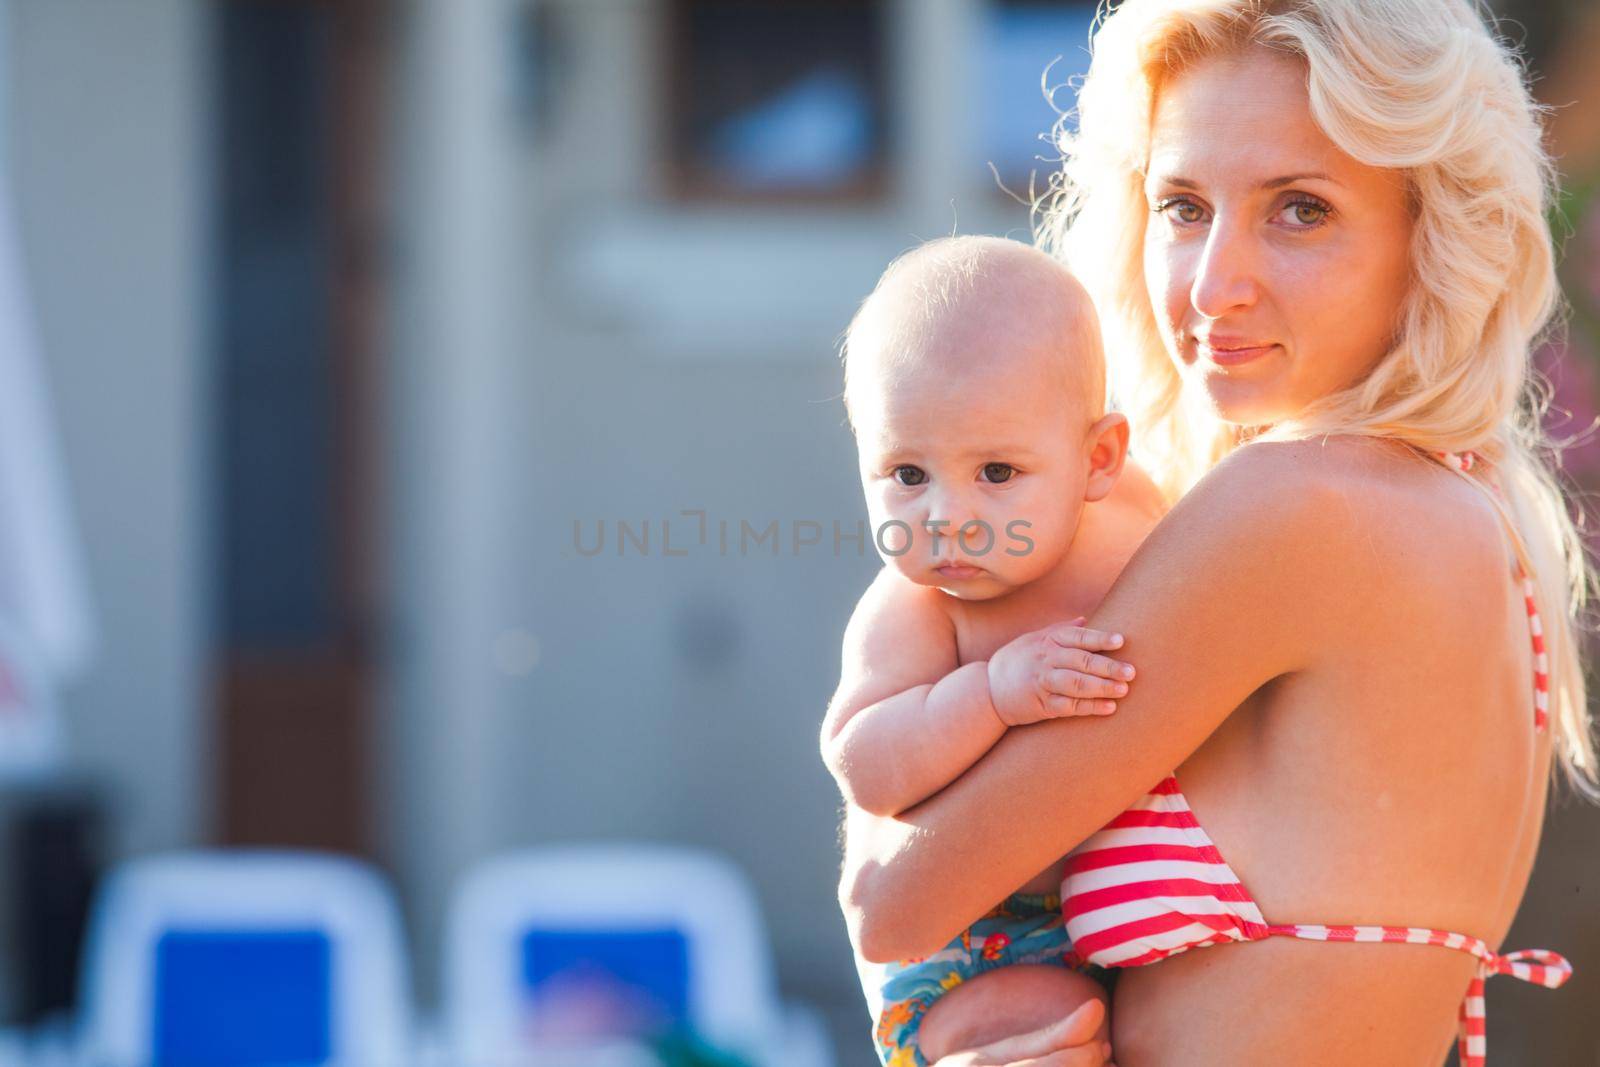 Pretty young mom with baby at the swimming pool